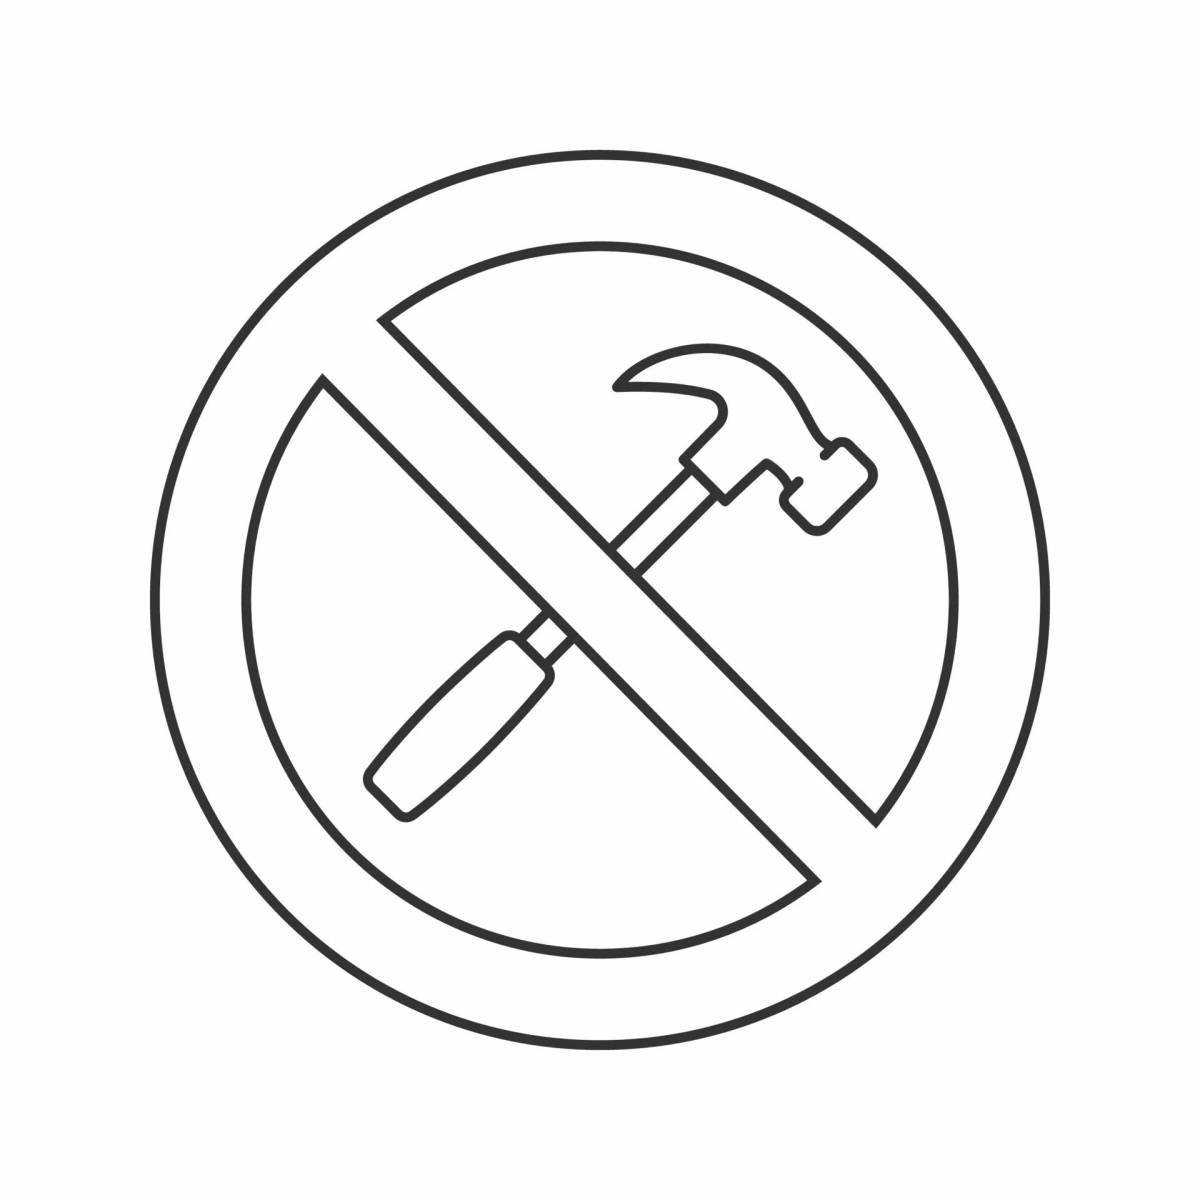 Exciting safety sign coloring page